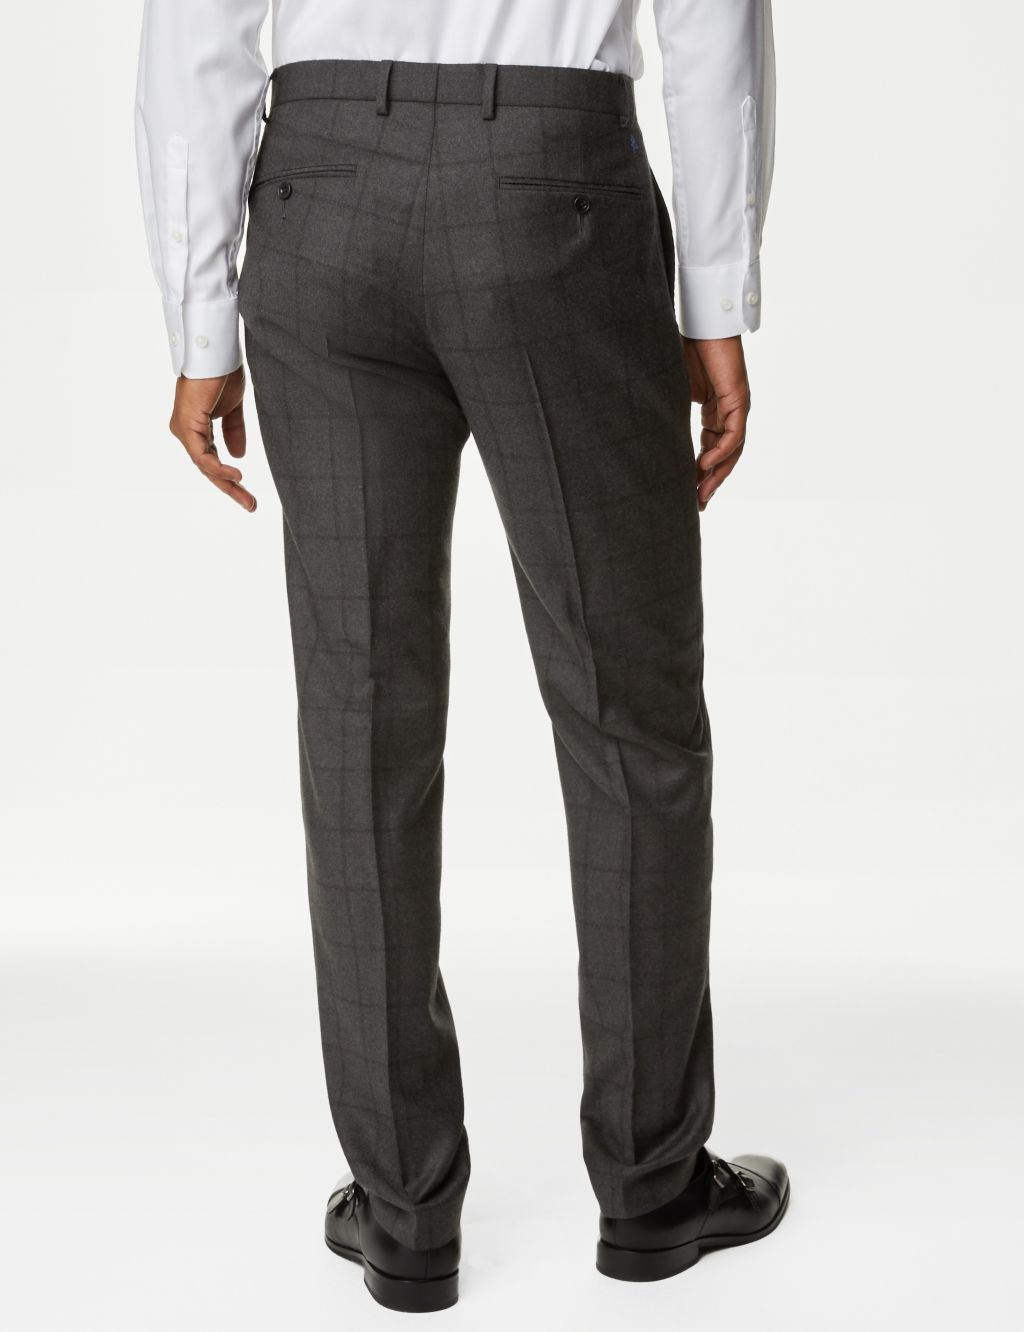 Slim Fit Pure Wool Check Suit image 5